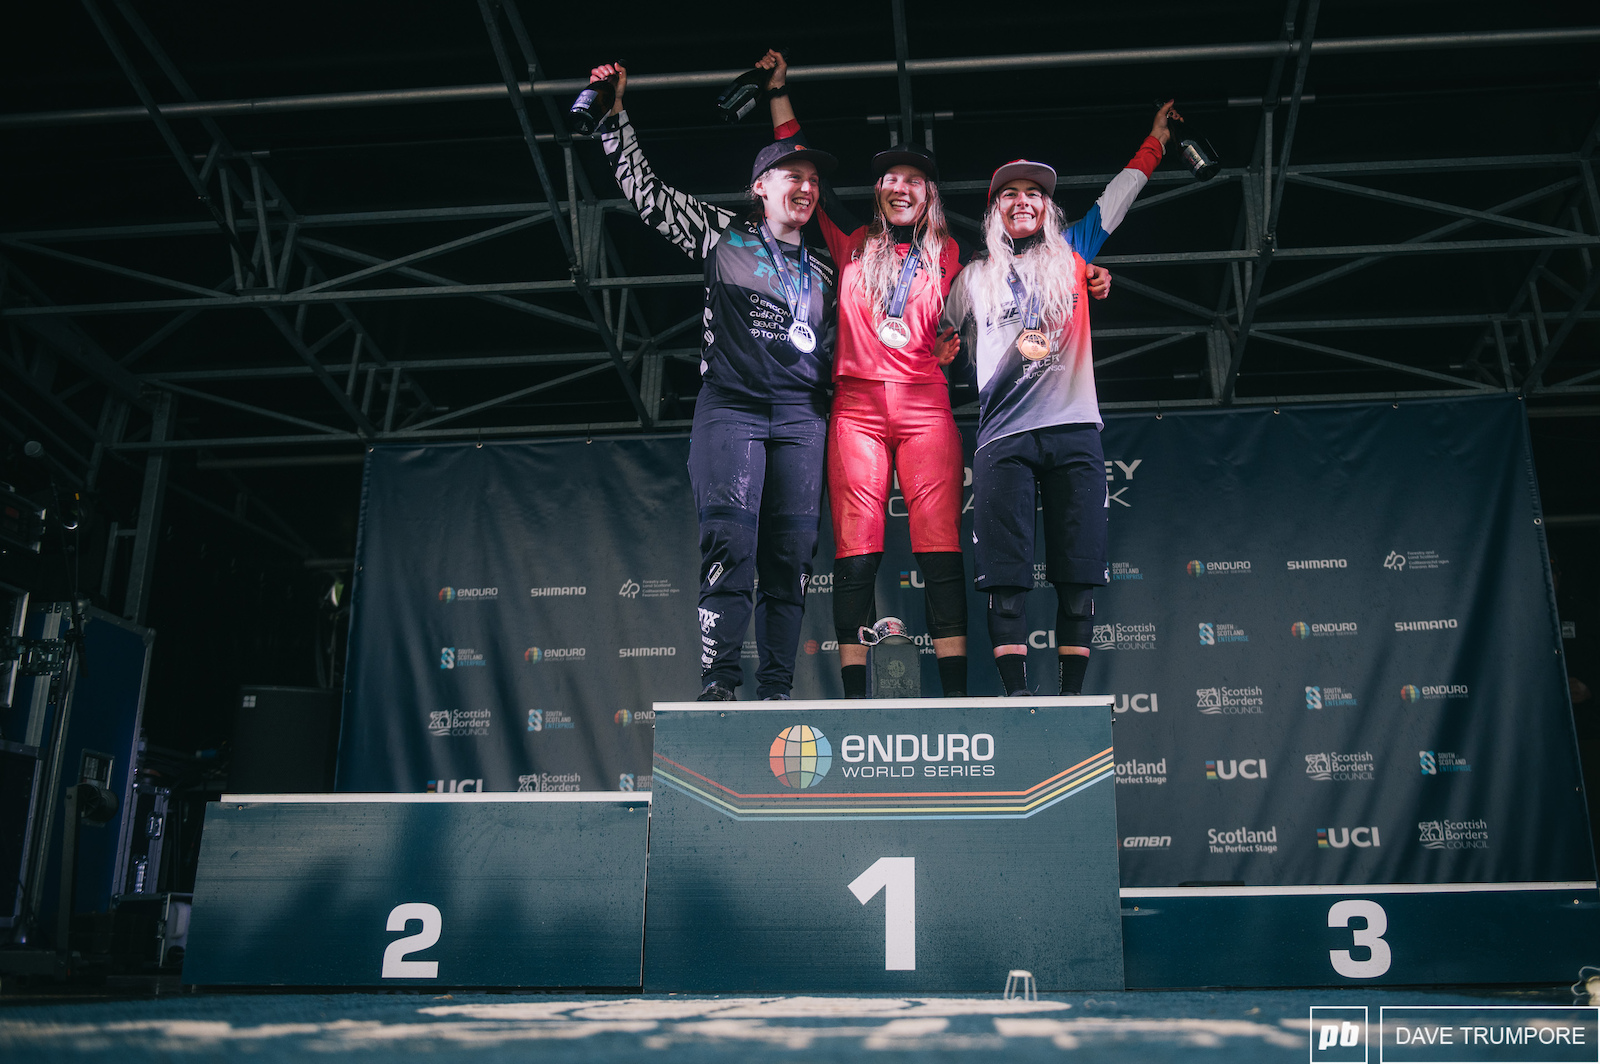 Ella Conolly flanked by Bex Baraona and Isabeau Courdurier on the women s podium.